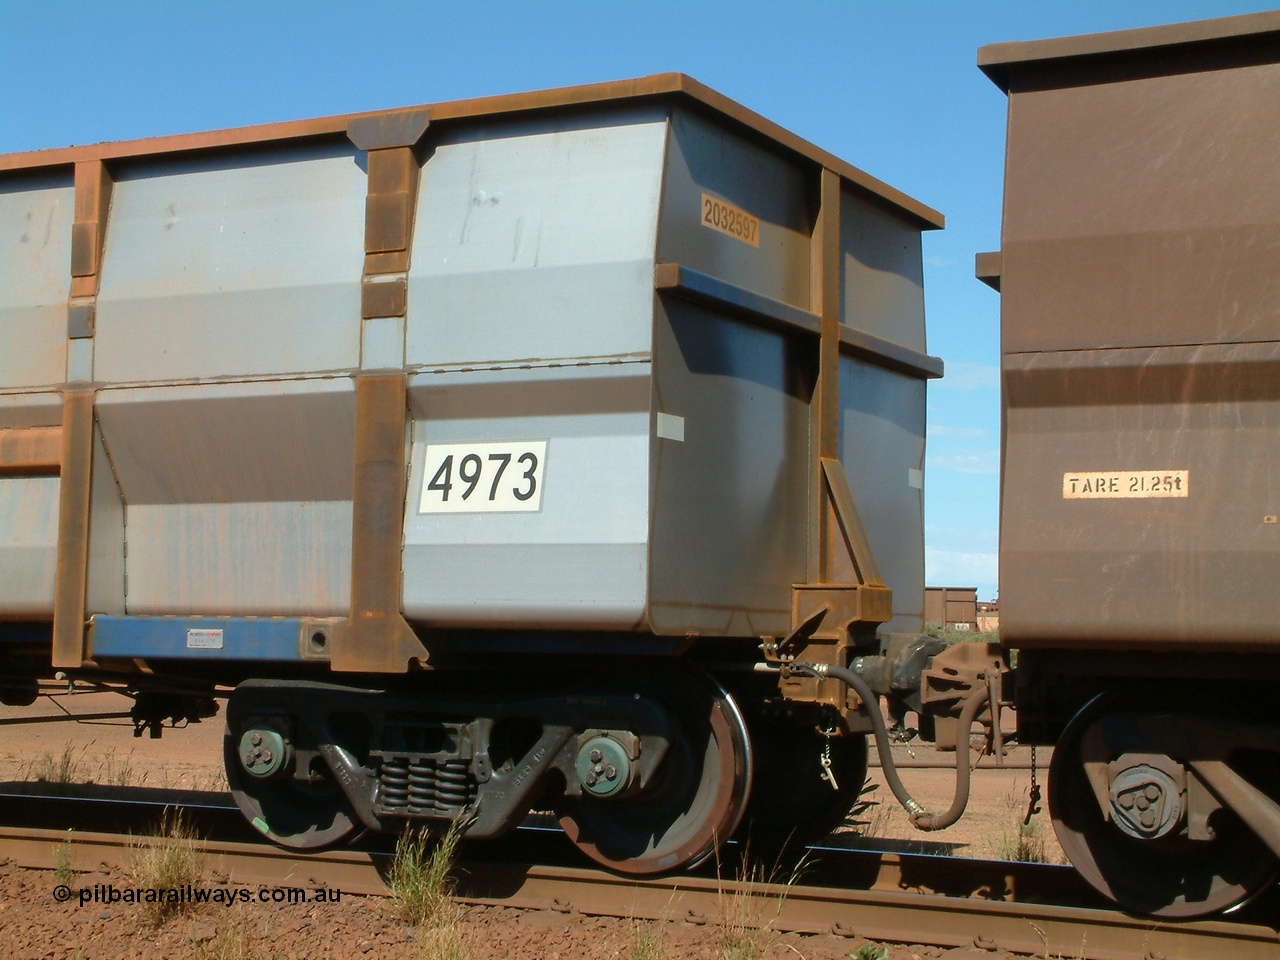 040412 143726
Nelson Point, Goninan built, Lynx Engineering designed ore waggon 4973 made from 5Cr12Ti stainless steel these waggons are known as Golynx waggons, asset number 2032597 with build date 02/2004. 12th April 2004.
Keywords: 4973;Goninan-WA;Golynx;BHP-ore-waggon;